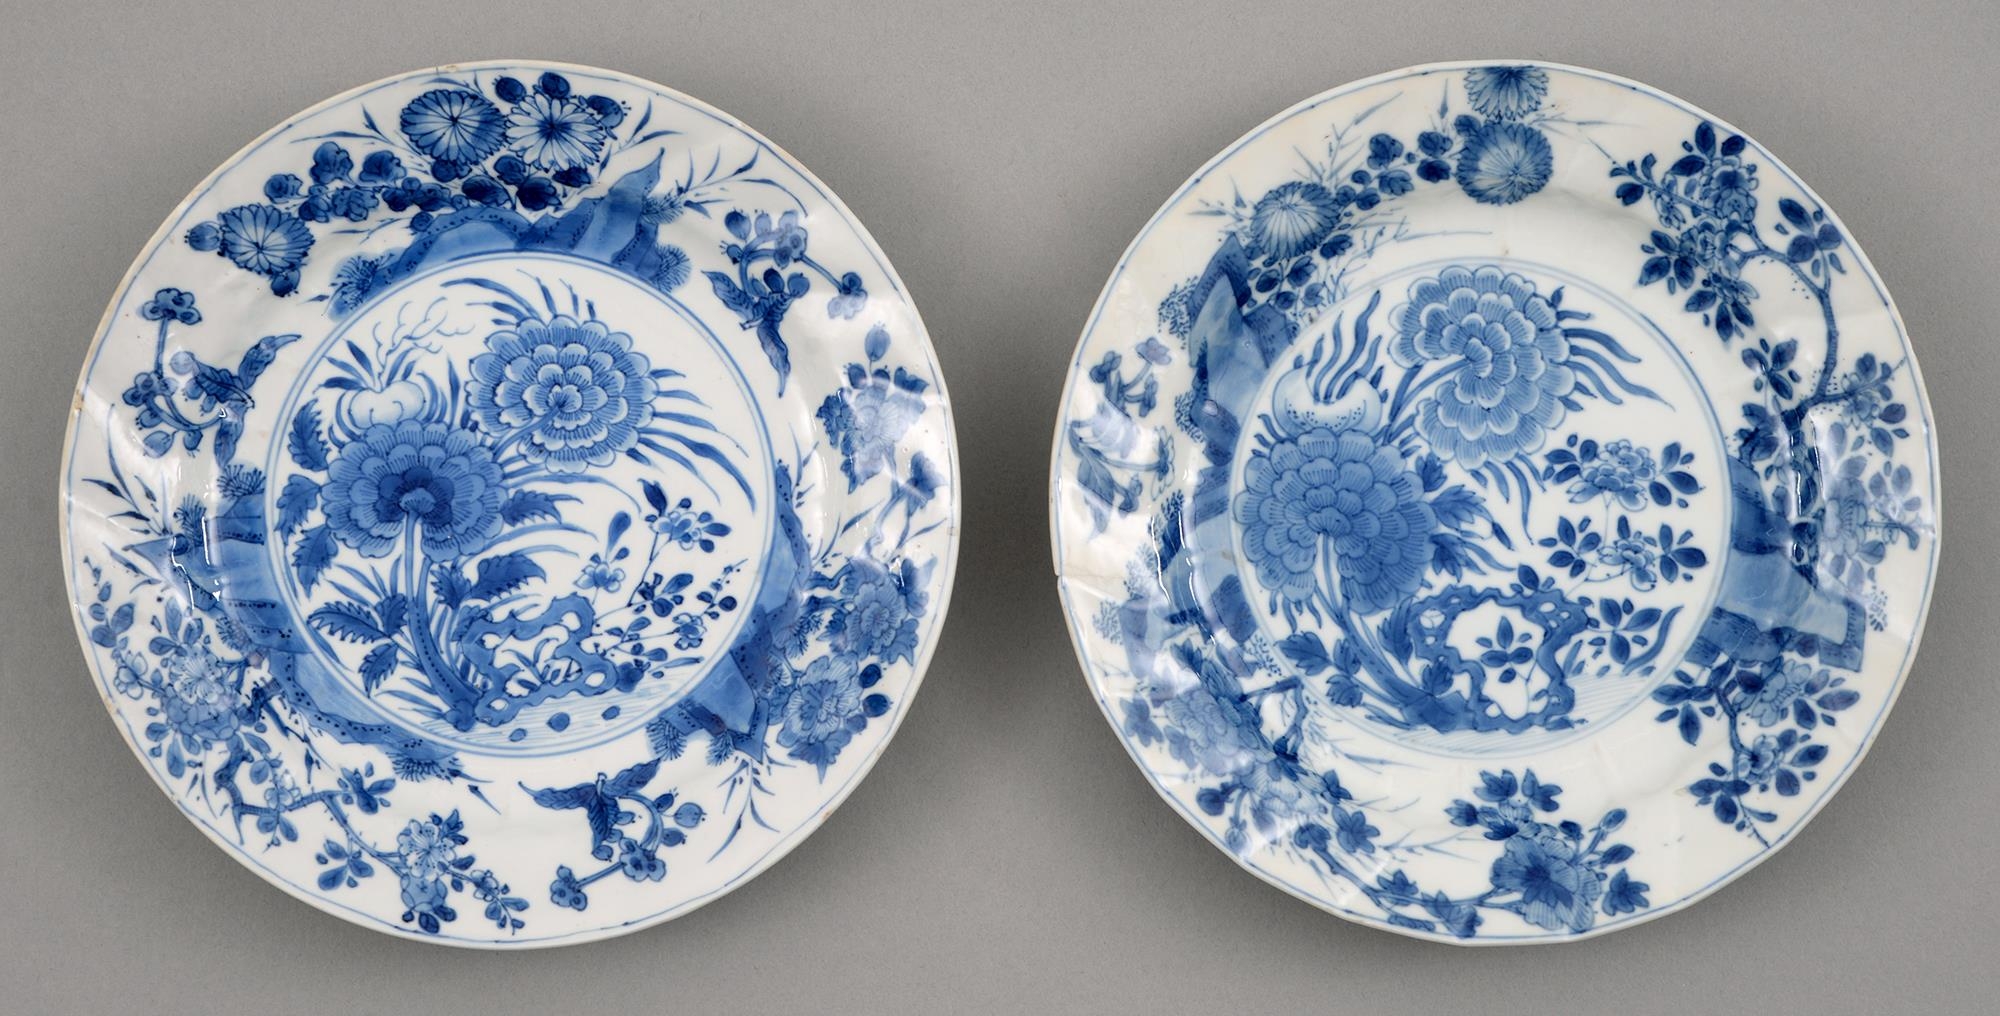 A pair of Chinese blue and white plates, Kangxi period, painted with peonies and other plants, the